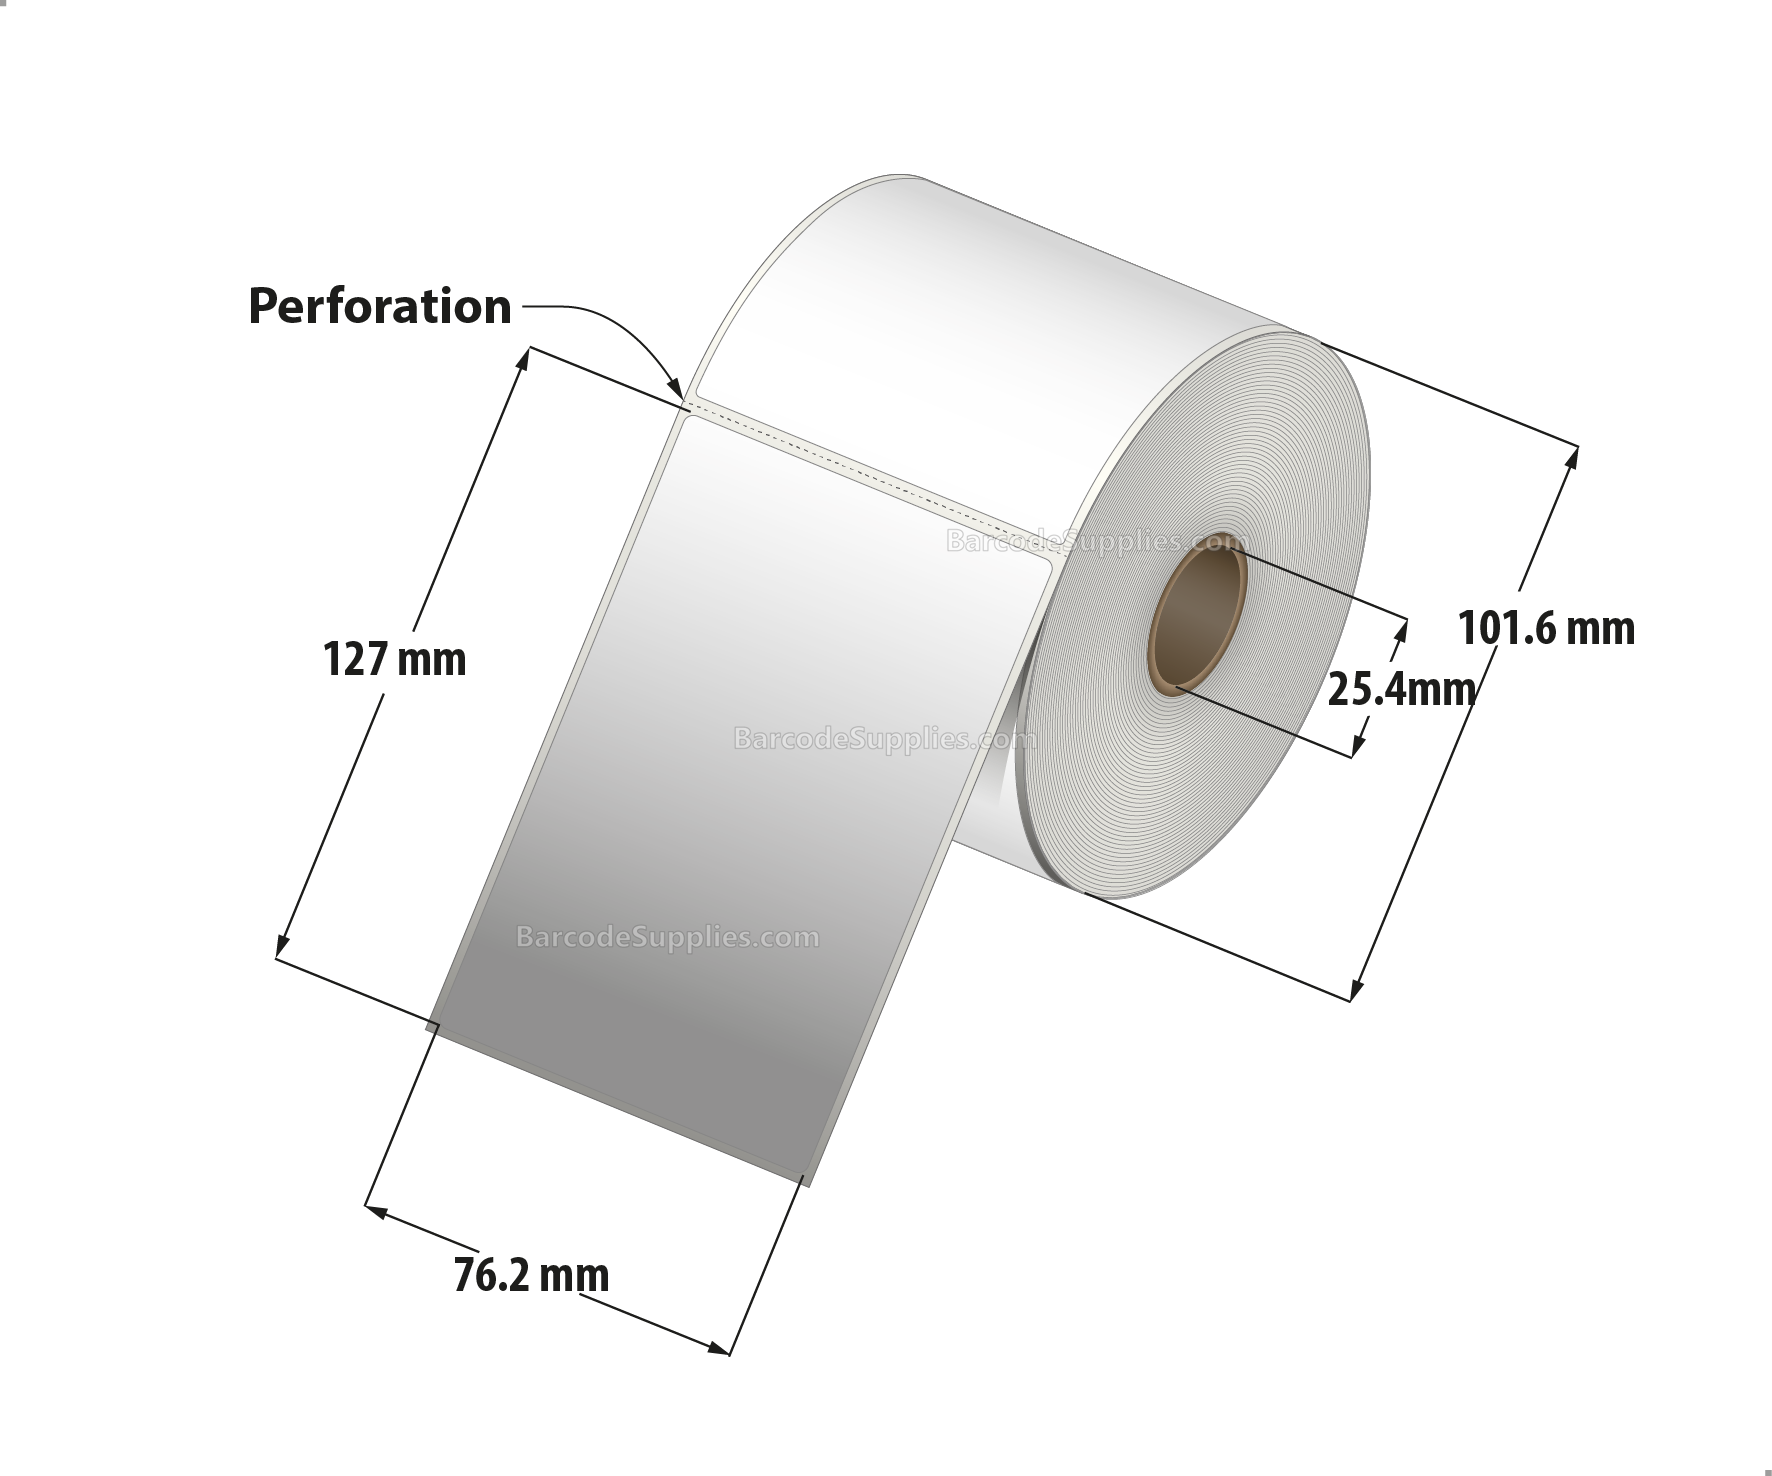 3 x 5 Direct Thermal White Labels With Acrylic Adhesive - Perforated - 300 Labels Per Roll - Carton Of 12 Rolls - 3600 Labels Total - MPN: RD-3-5-300-1